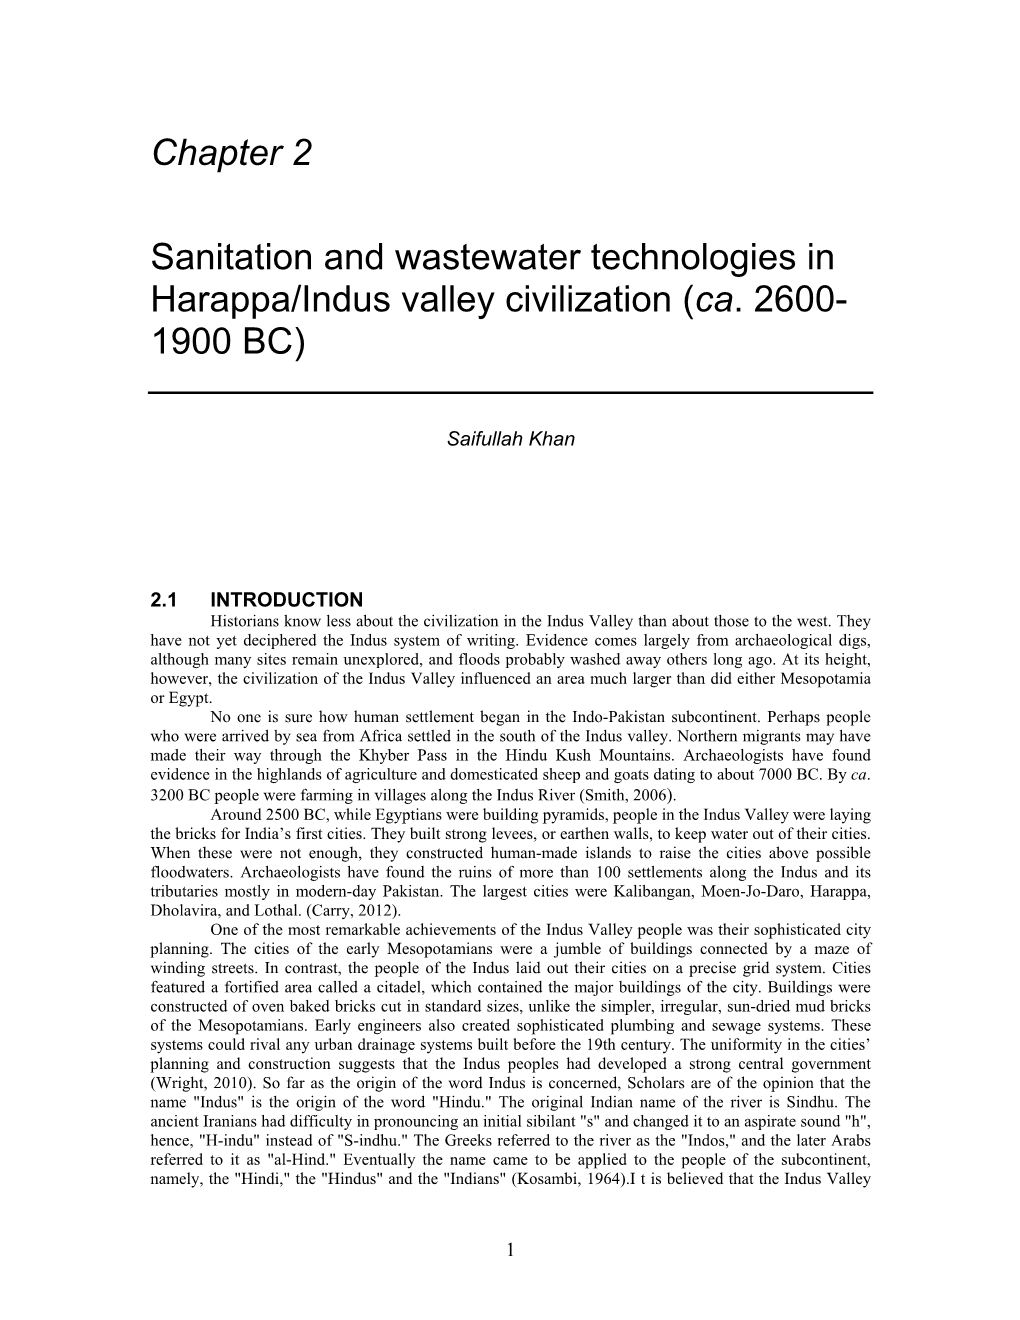 Chapter 2 Sanitation and Wastewater Technologies in Harappa/Indus